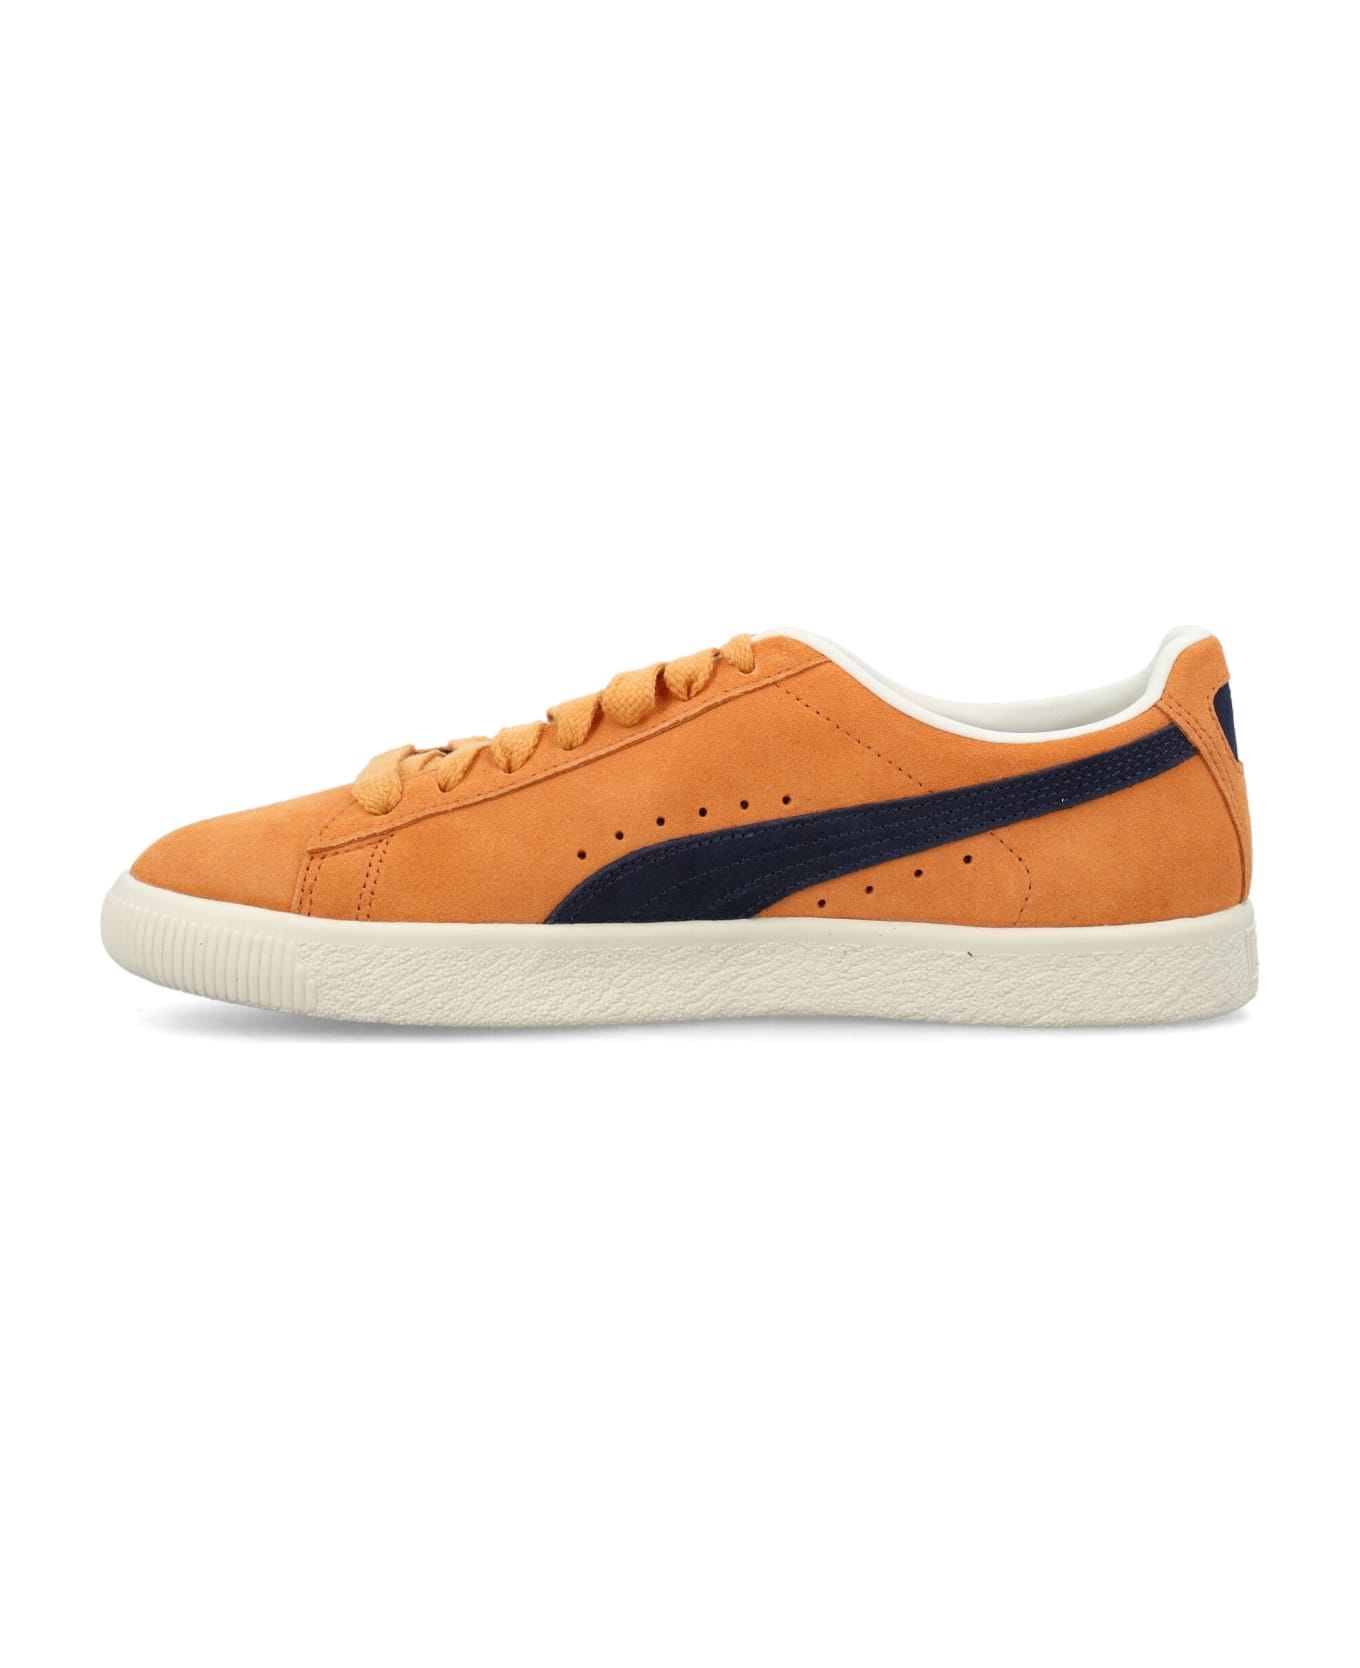 Puma Clyde Og Sneakers - CLEMENTINE NAVY スニーカー